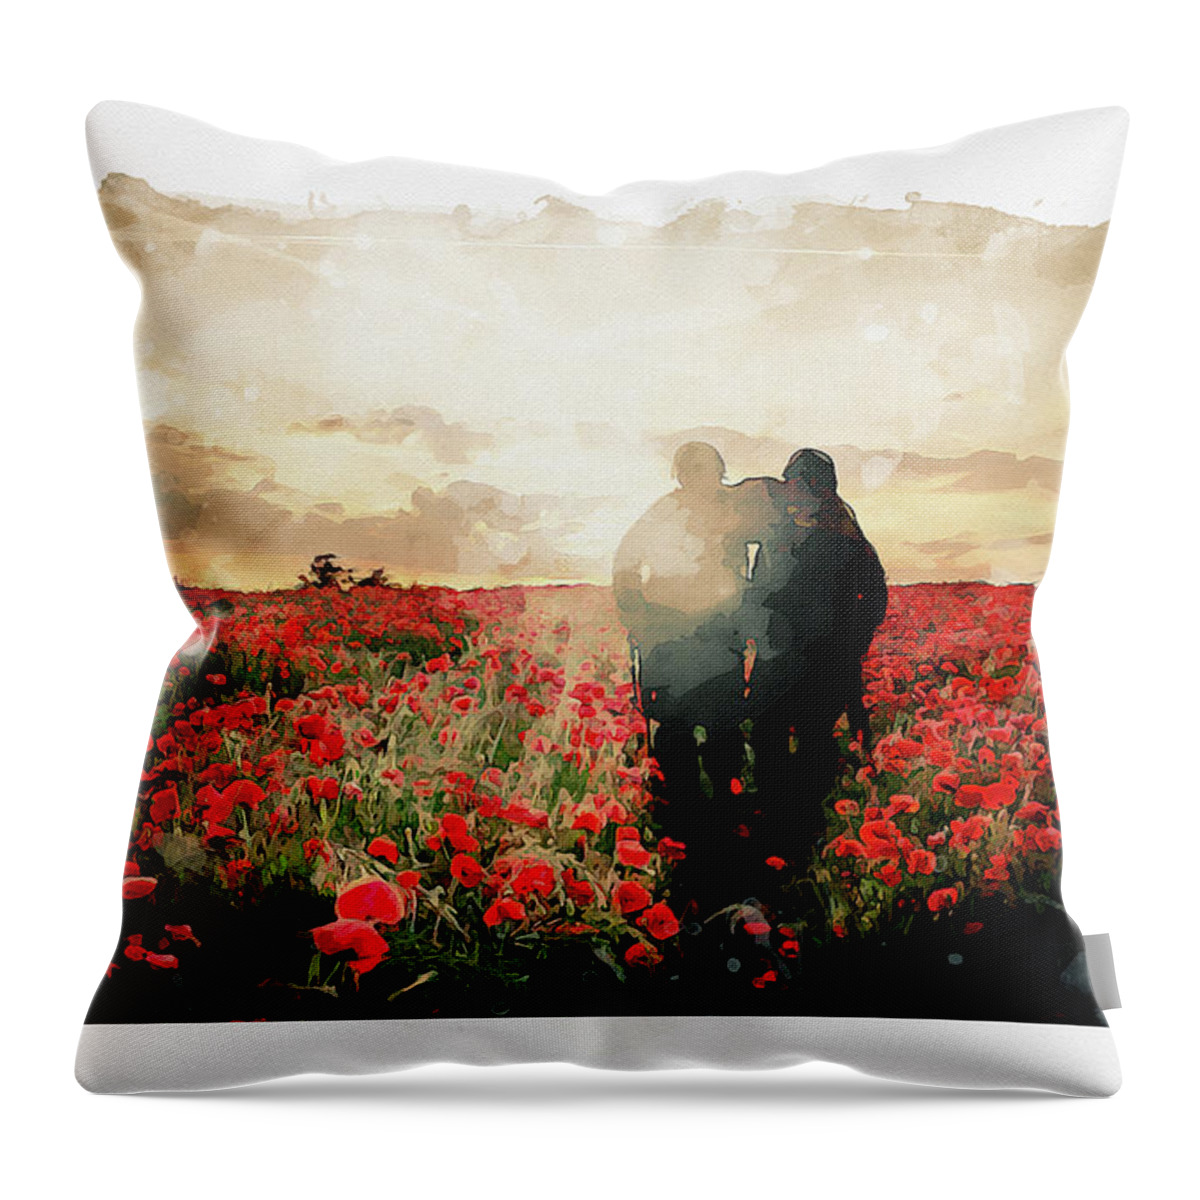 Art Throw Pillow featuring the digital art In To The Light by Airpower Art